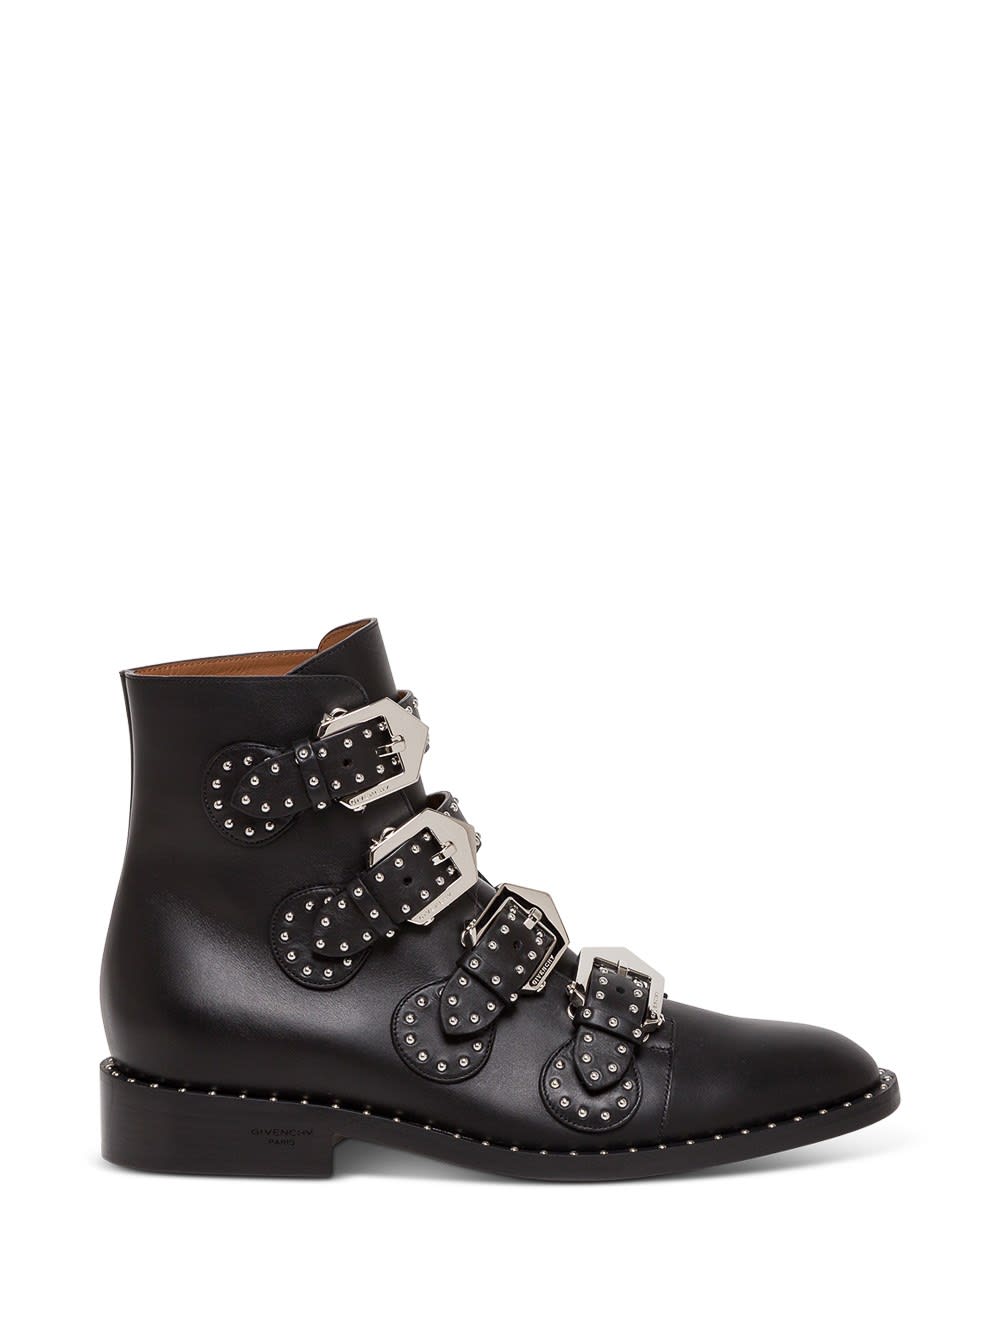 Givenchy Black Lether Ankle Botts With Buckles And Studs Details